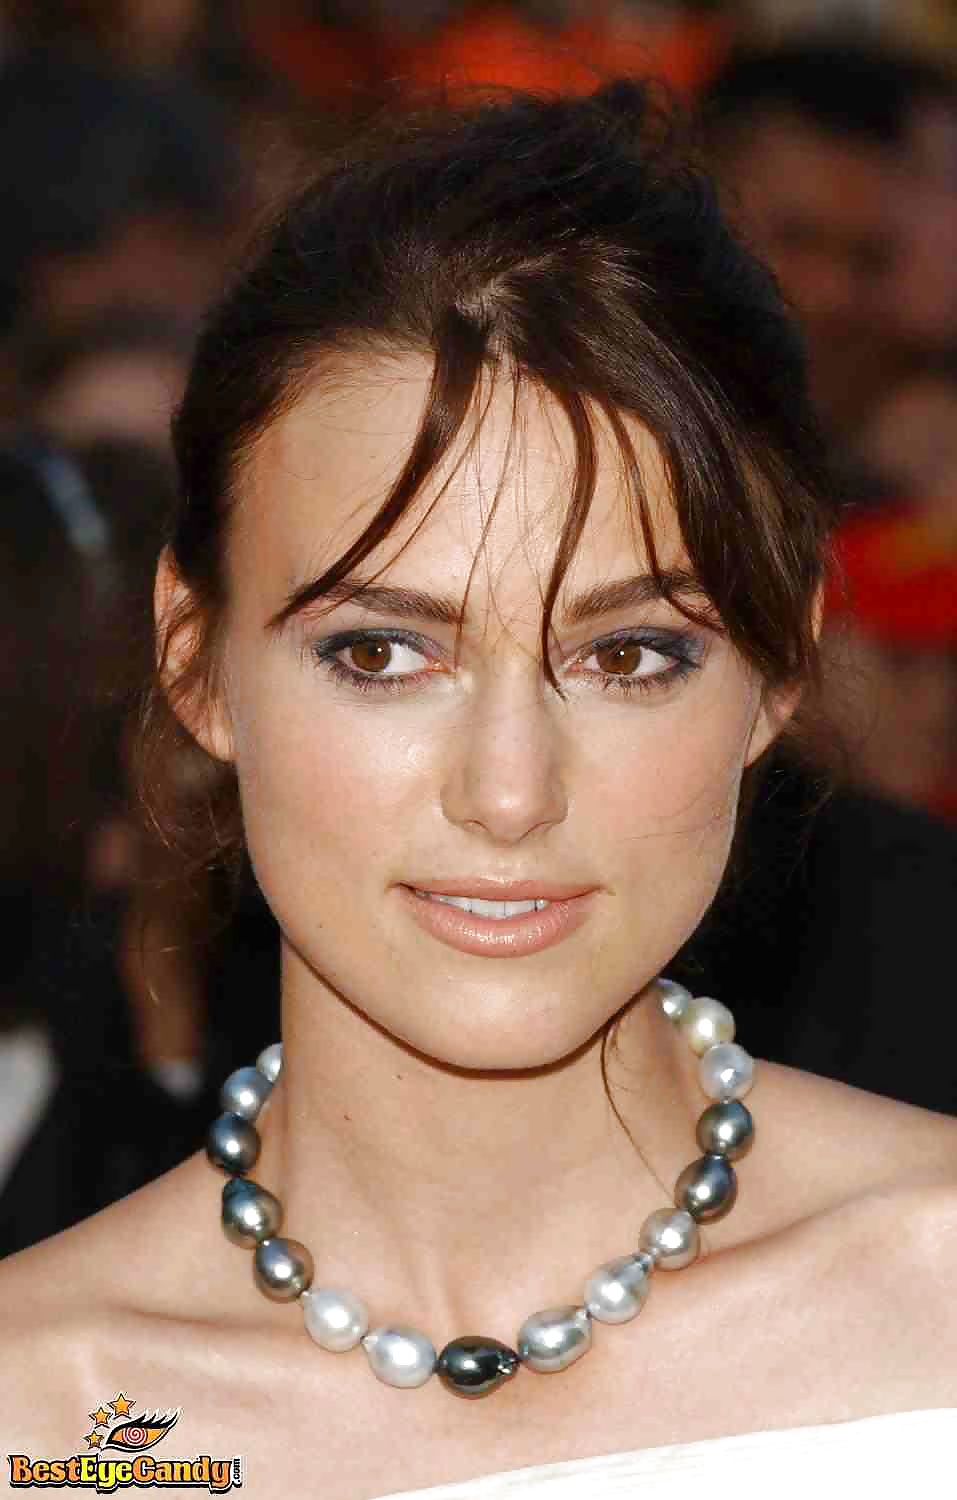 Keira Knightley The Royal Lady of England #35649637